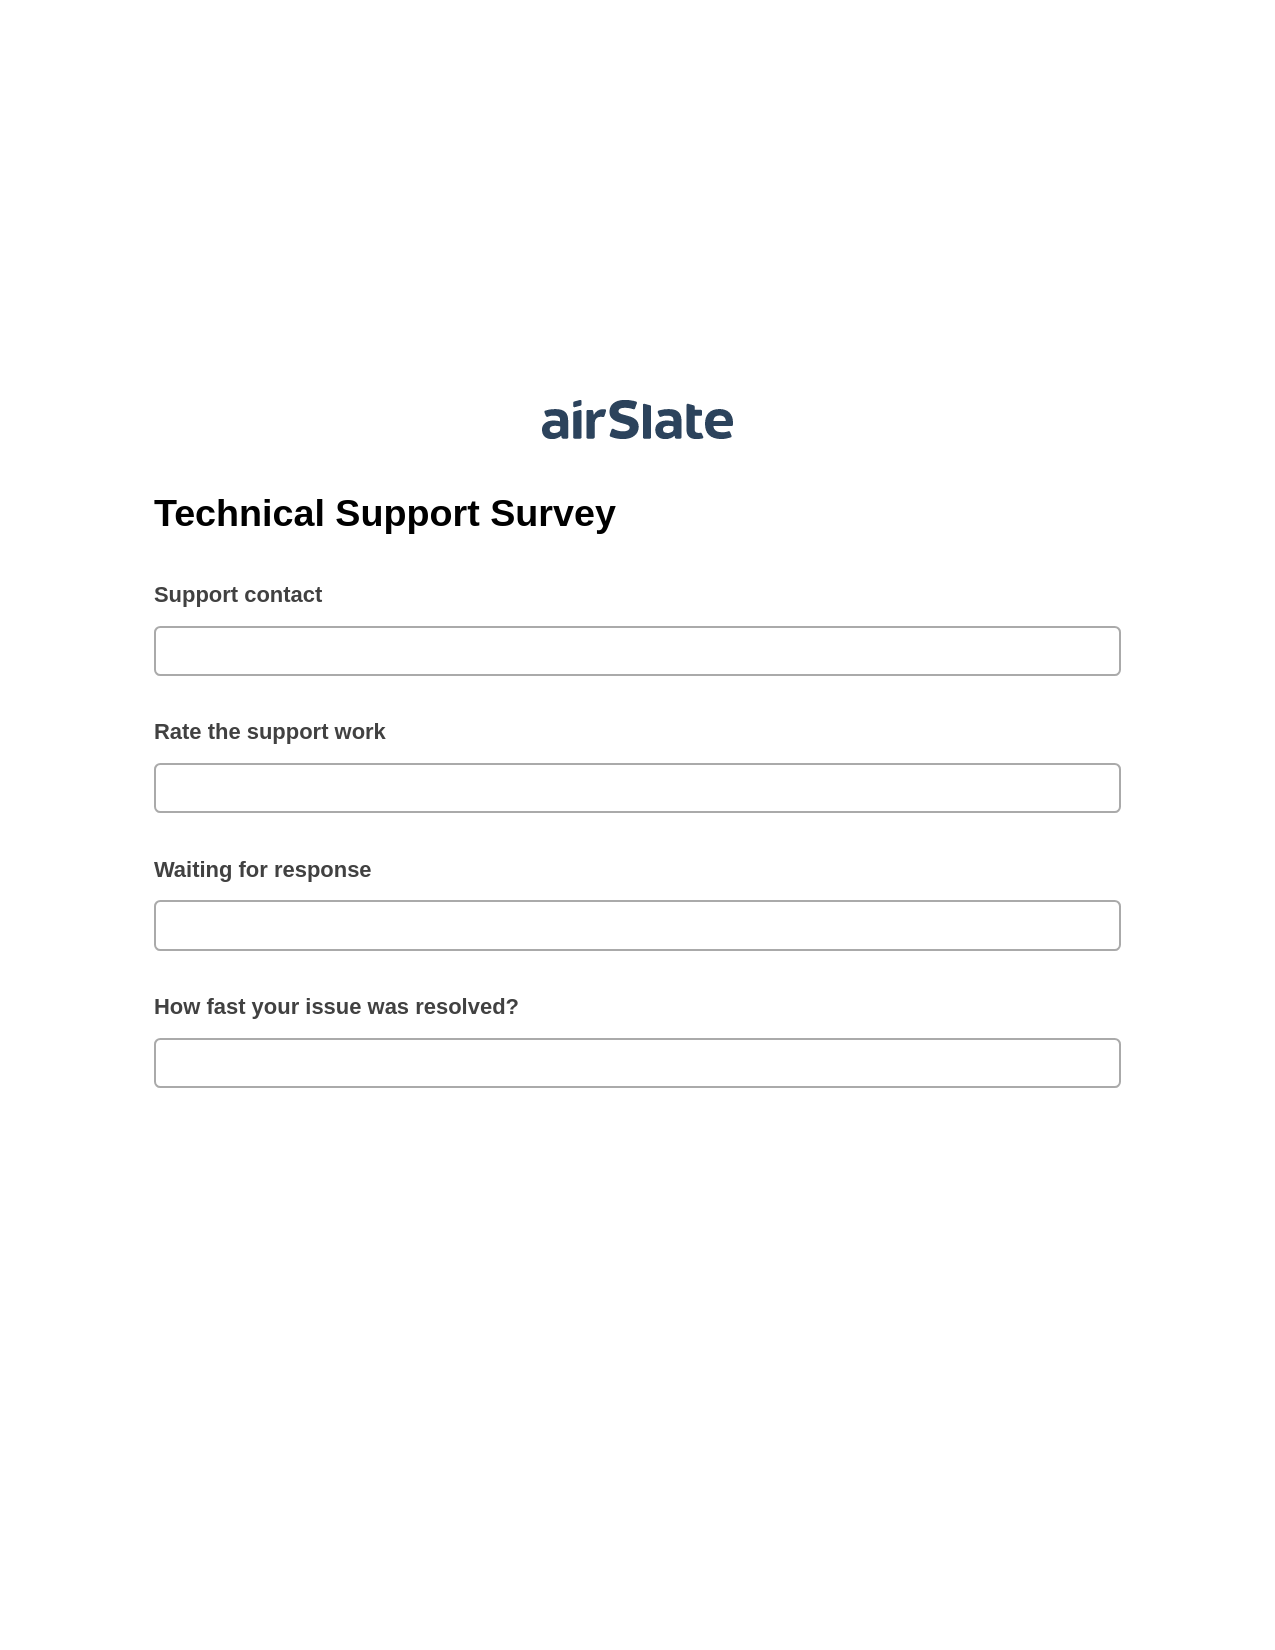 Technical Support Survey Pre-fill from CSV File Bot, Set signature type addon, Export to Excel 365 Bot